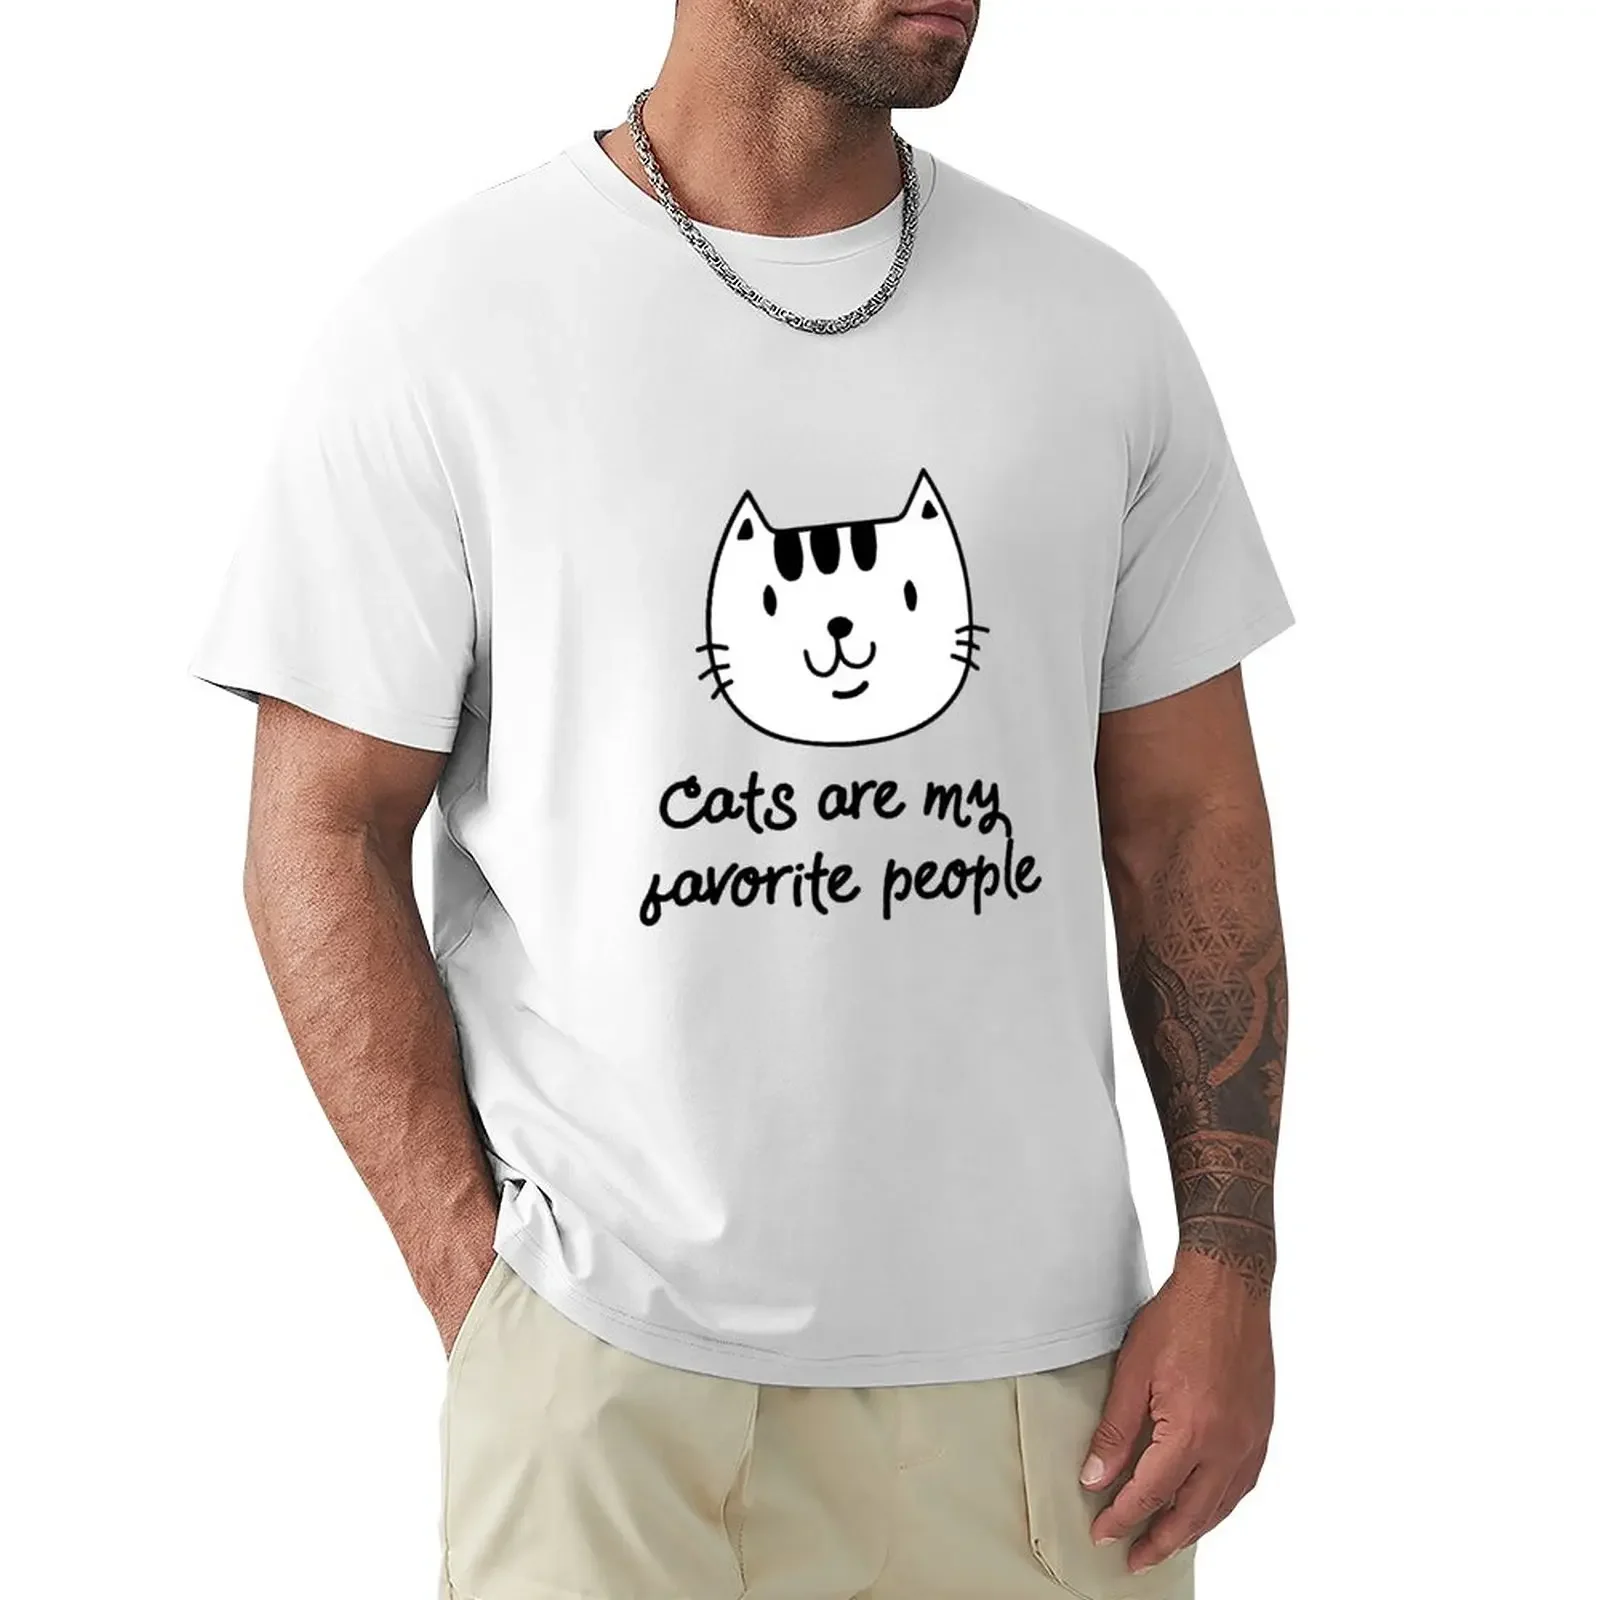 

Cats are my favorite people T-Shirt korean fashion blacks mens t shirt graphic cute tops shirts graphic tees clothes for men